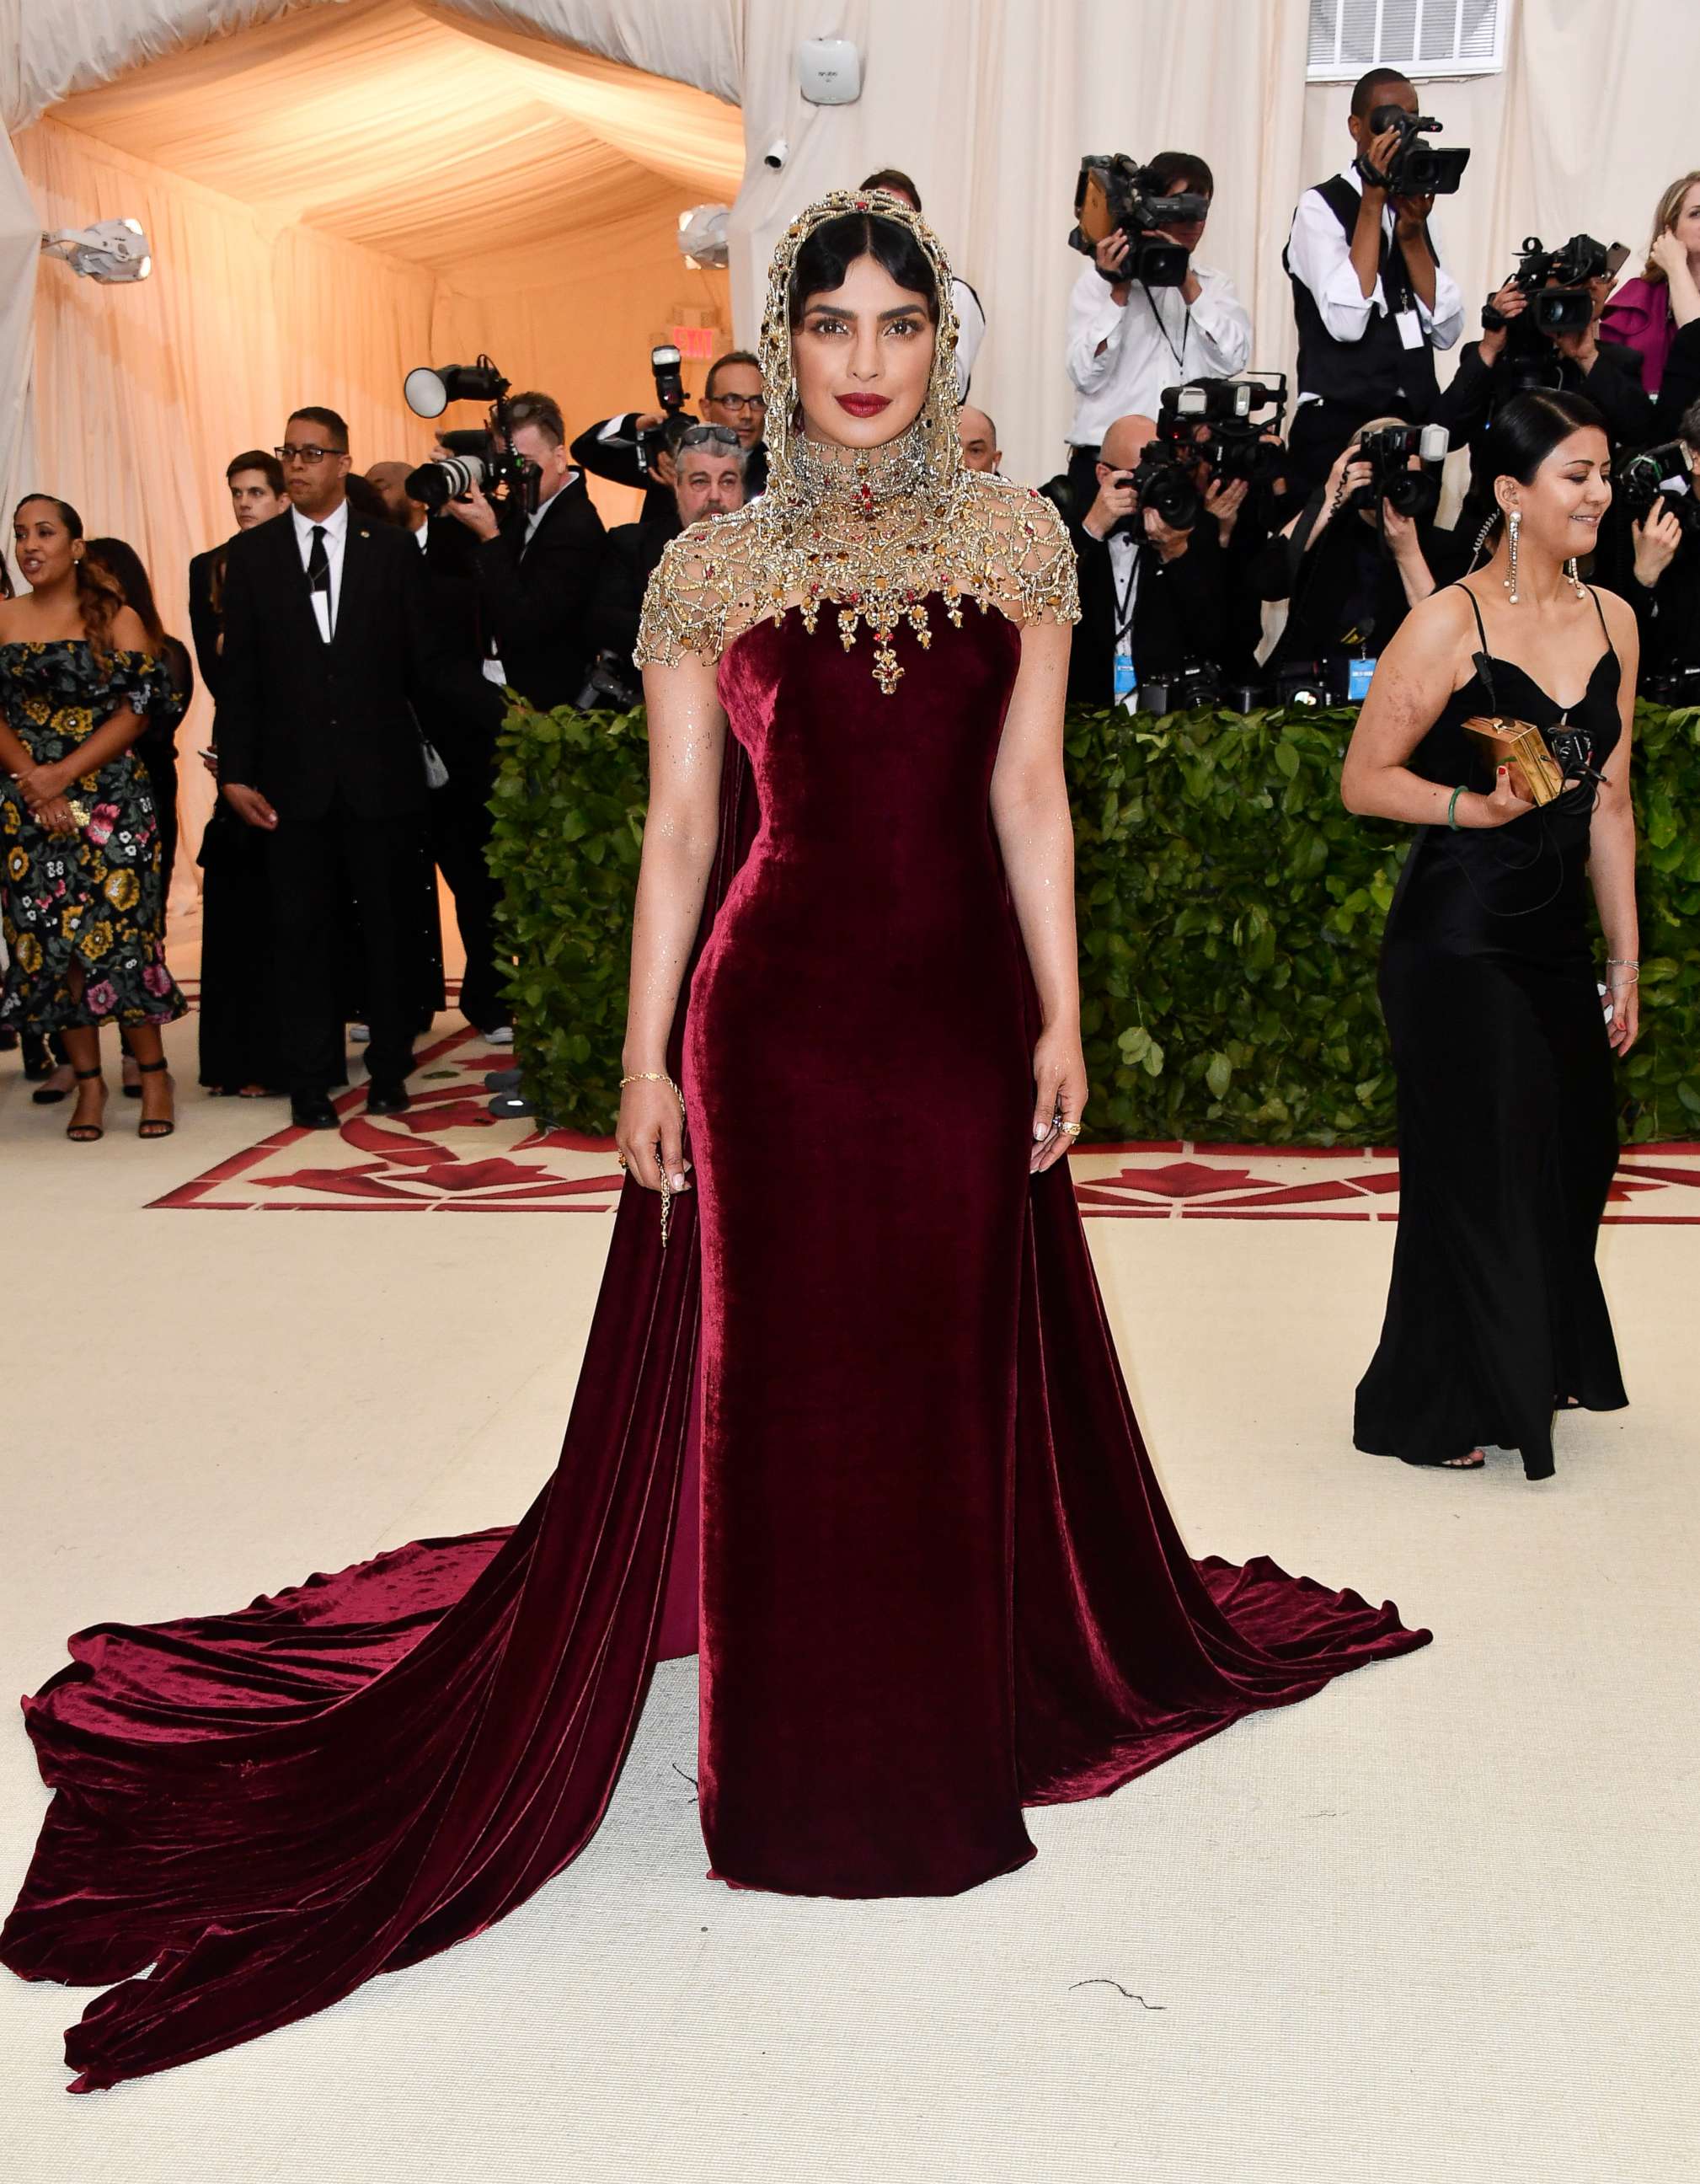 PHOTO: Priyanka Chopra attends the Heavenly Bodies: Fashion & The Catholic Imagination Costume Institute Gala at The Metropolitan Museum of Art on May 7, 2018 in New York City.